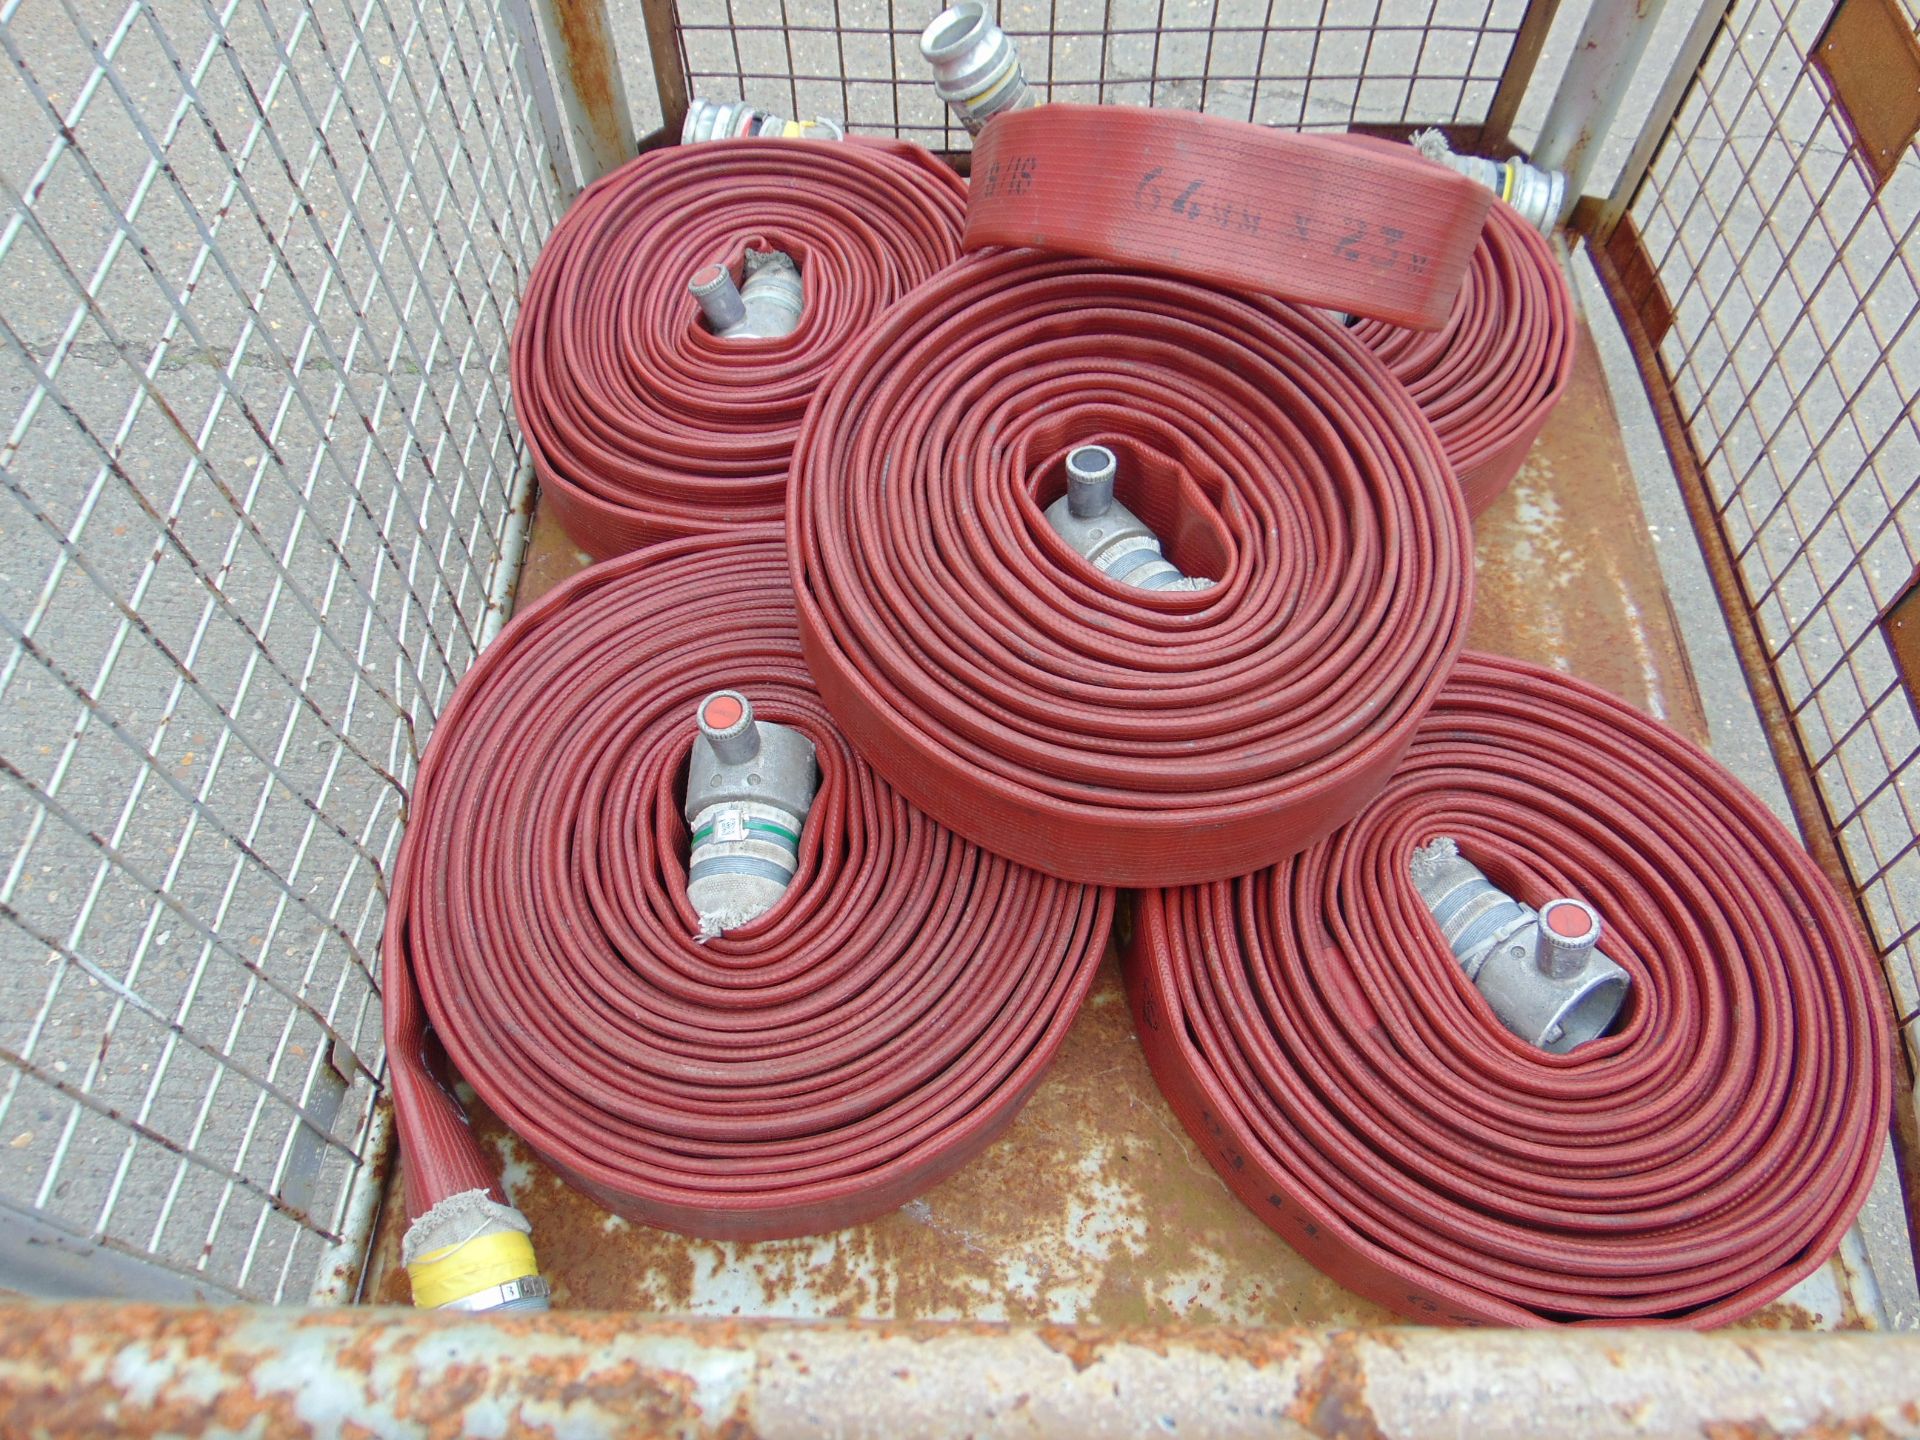 5 x Angus 64mm x 23m Layflat Fire Hoses with Couplings Sold as shown without warranty. - Bild 2 aus 4